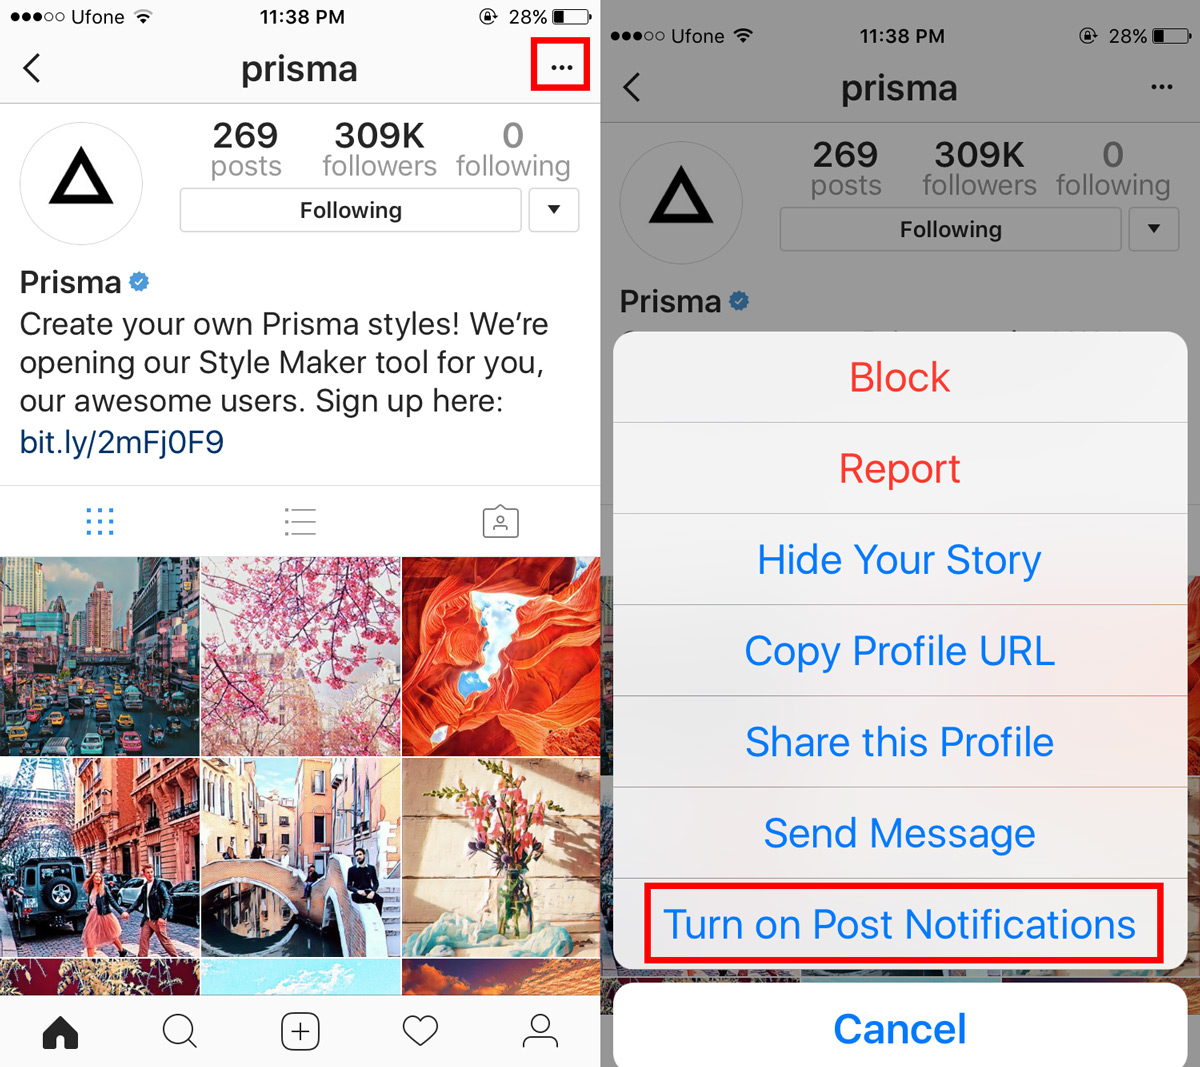 How To Turn On Post Notifications For An Instagram Account